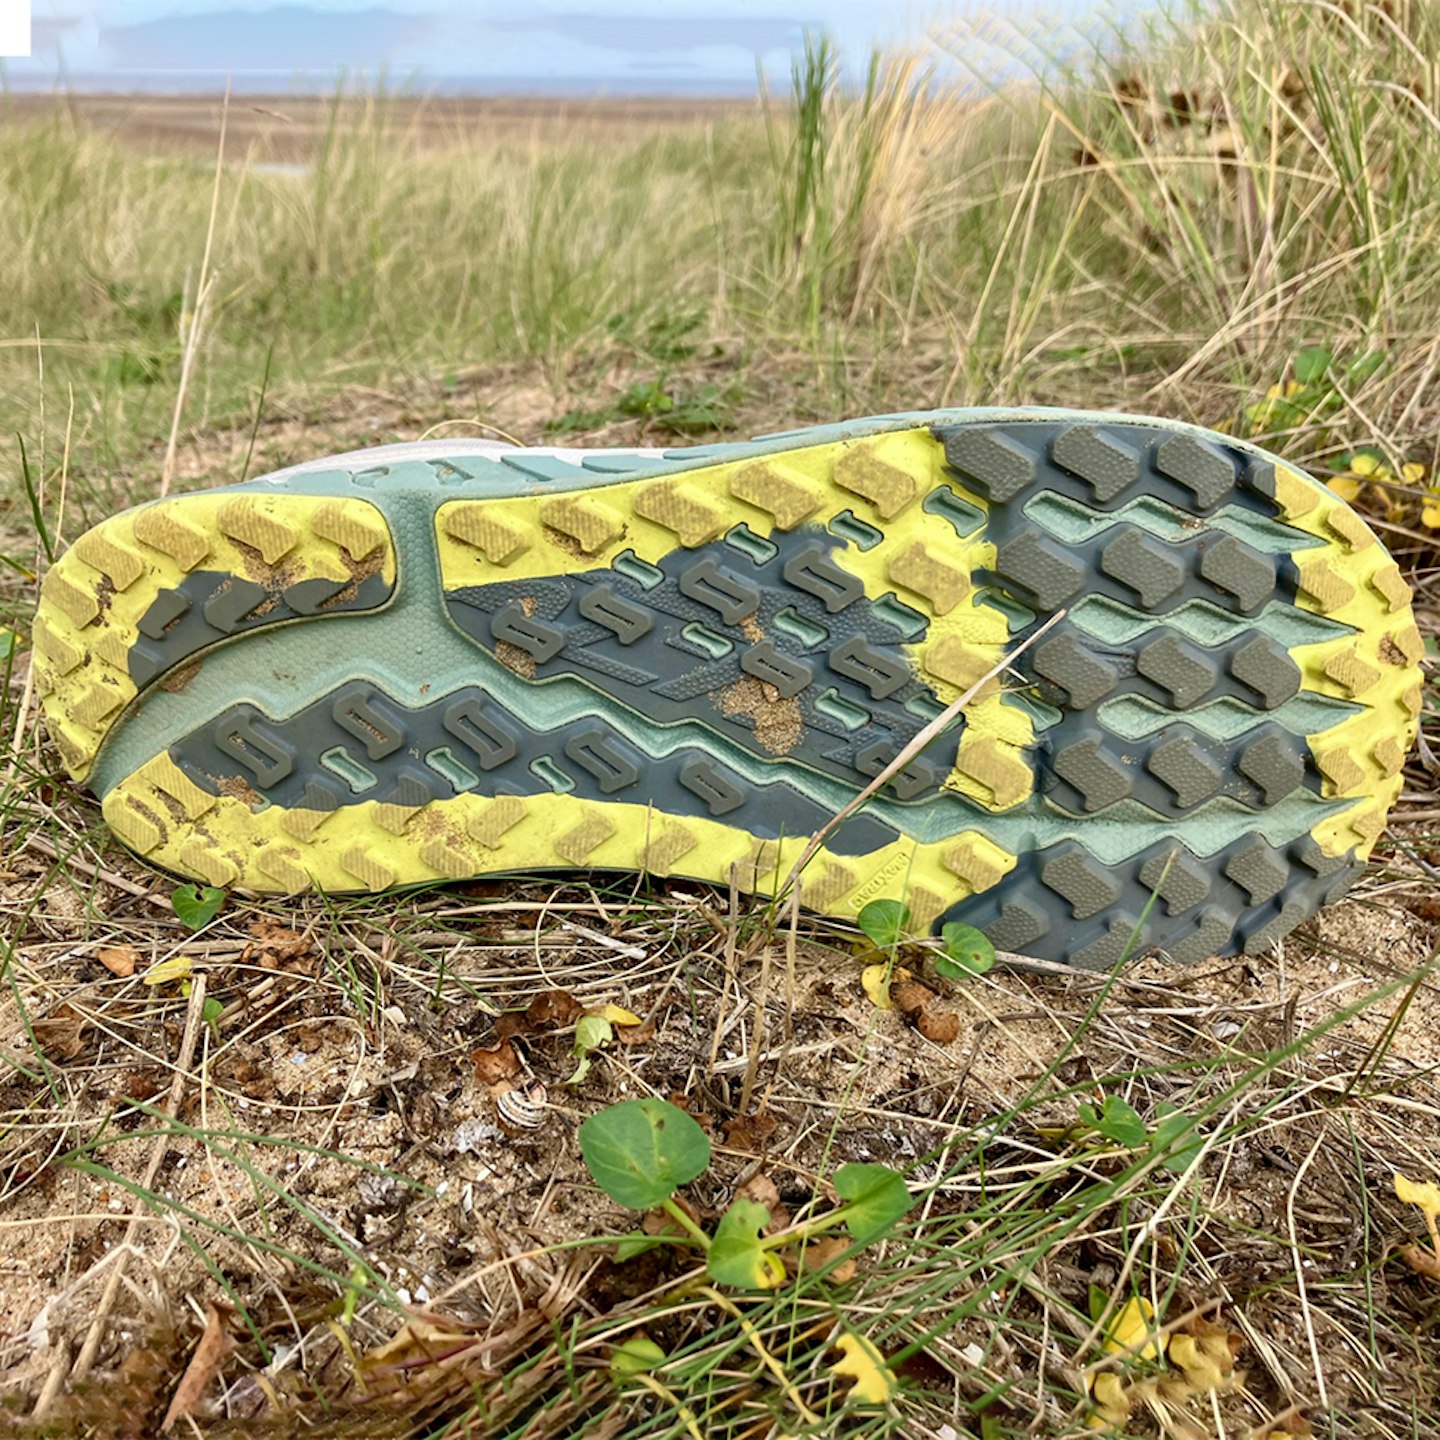 Altra Outroad trail running shoe full look at lugs